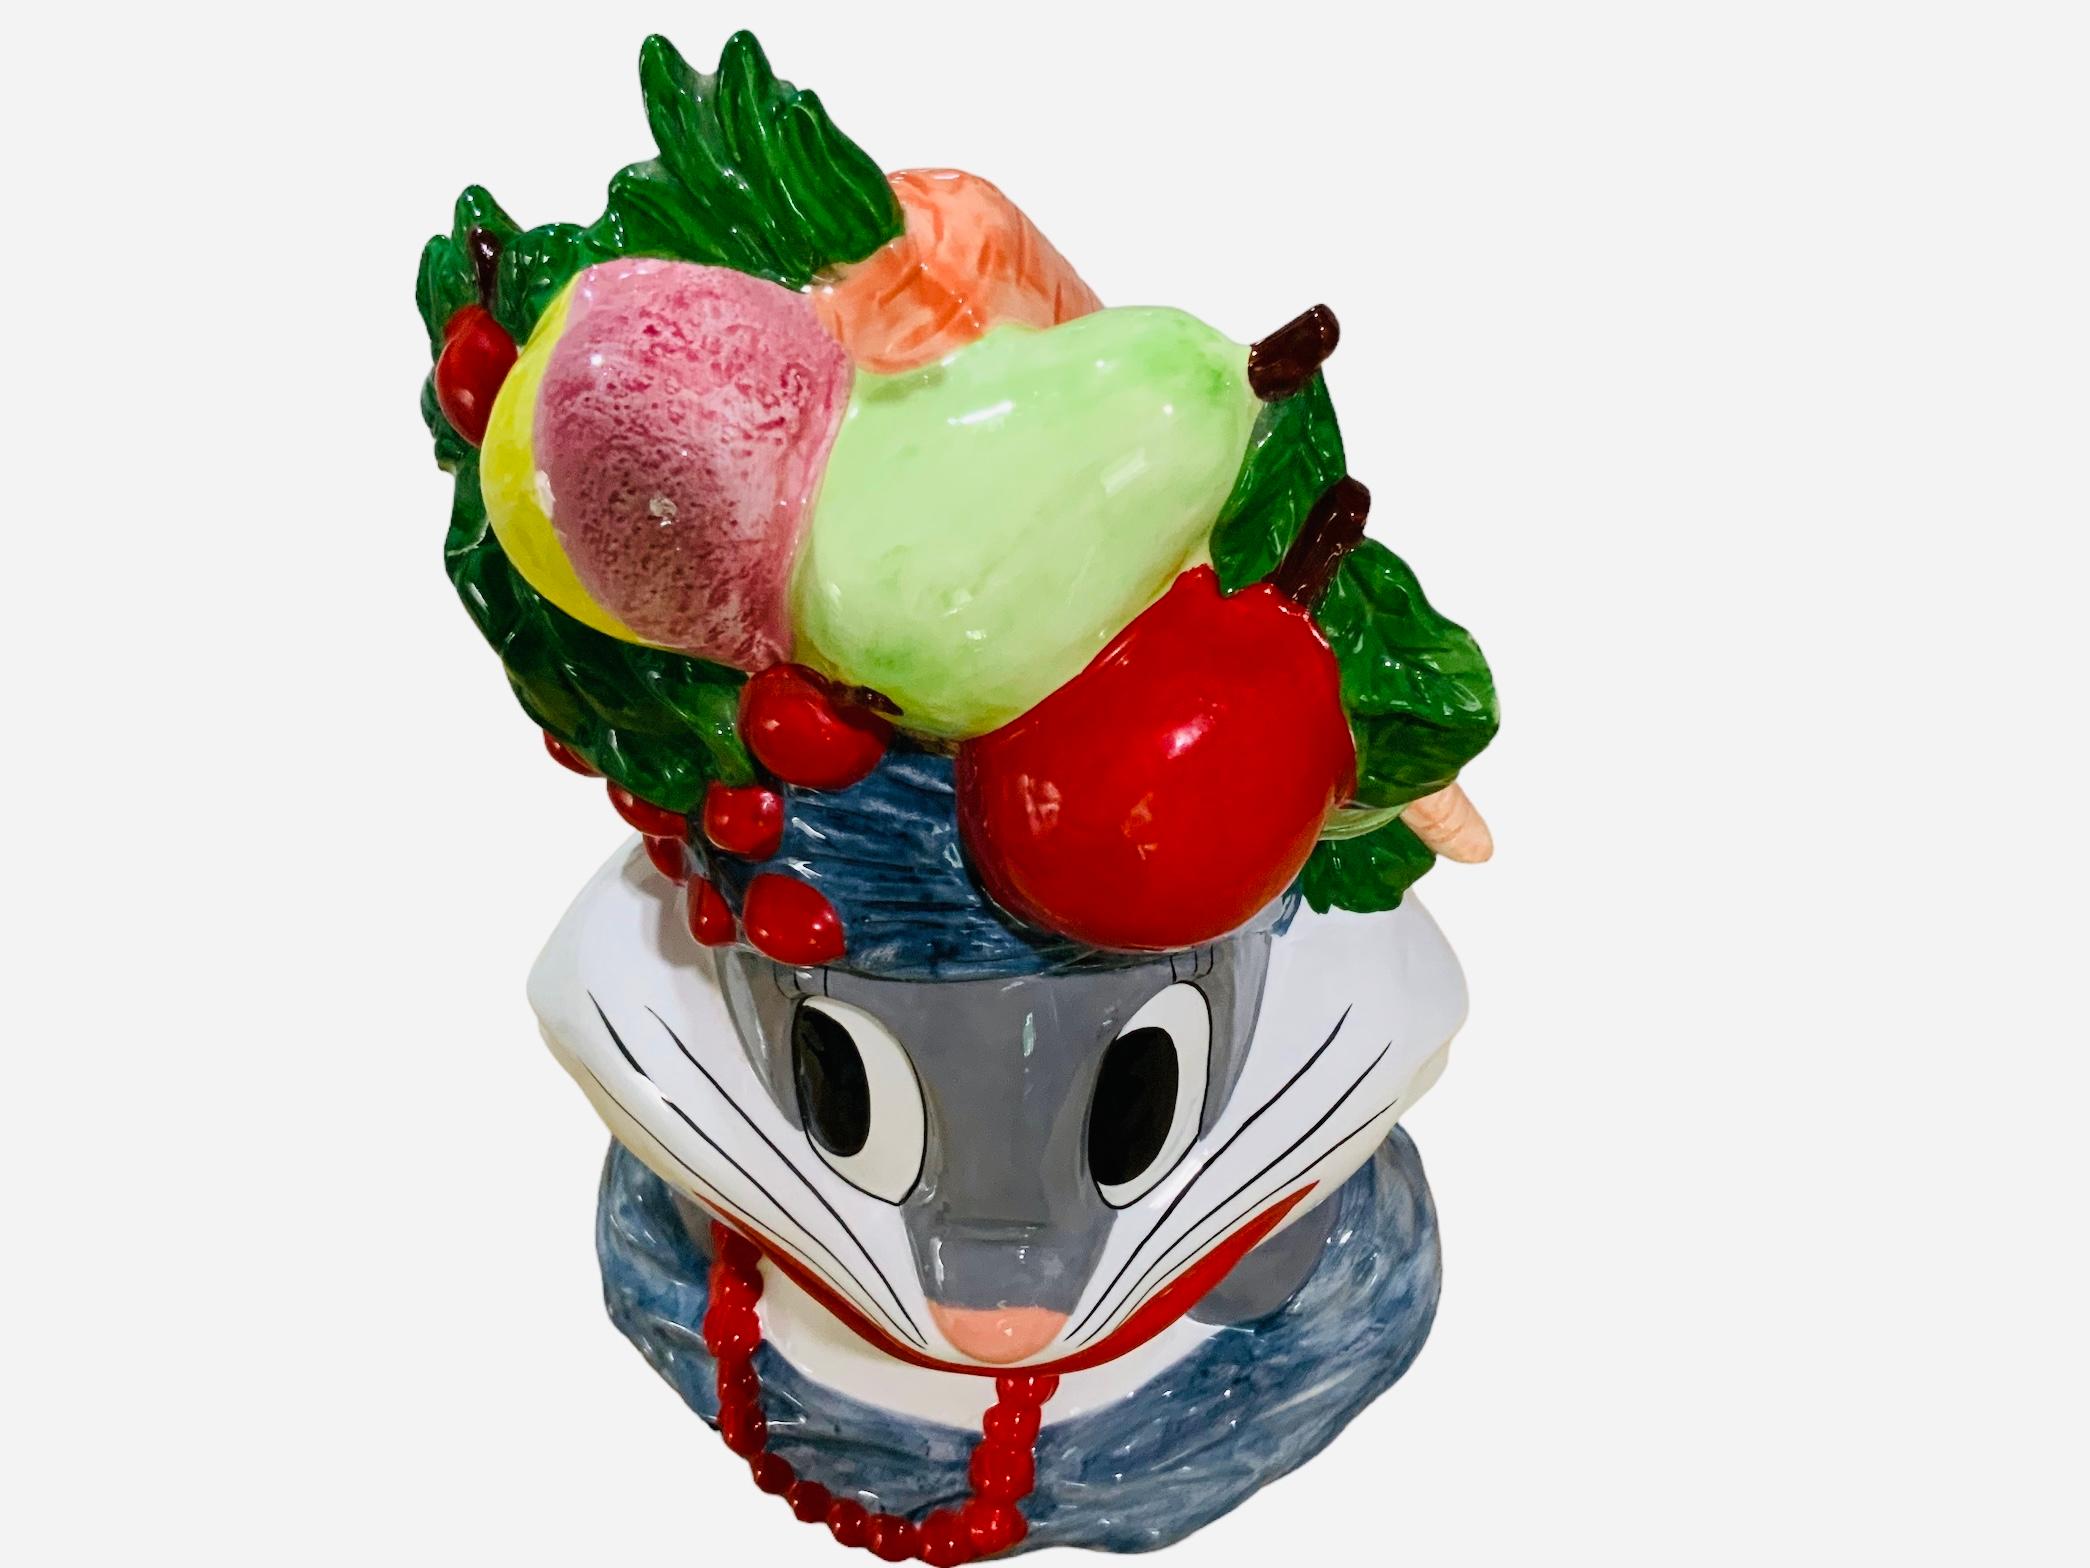 This is a Warner Bros, Looney Tunes Bugs Bunny Carmen Miranda Cookie Jar. It depicts a hand painted ceramic cookie jar shaped as Bugs Bunny head adorned with a turban full of fruits. He is also wearing a red beads necklace. Below the base is